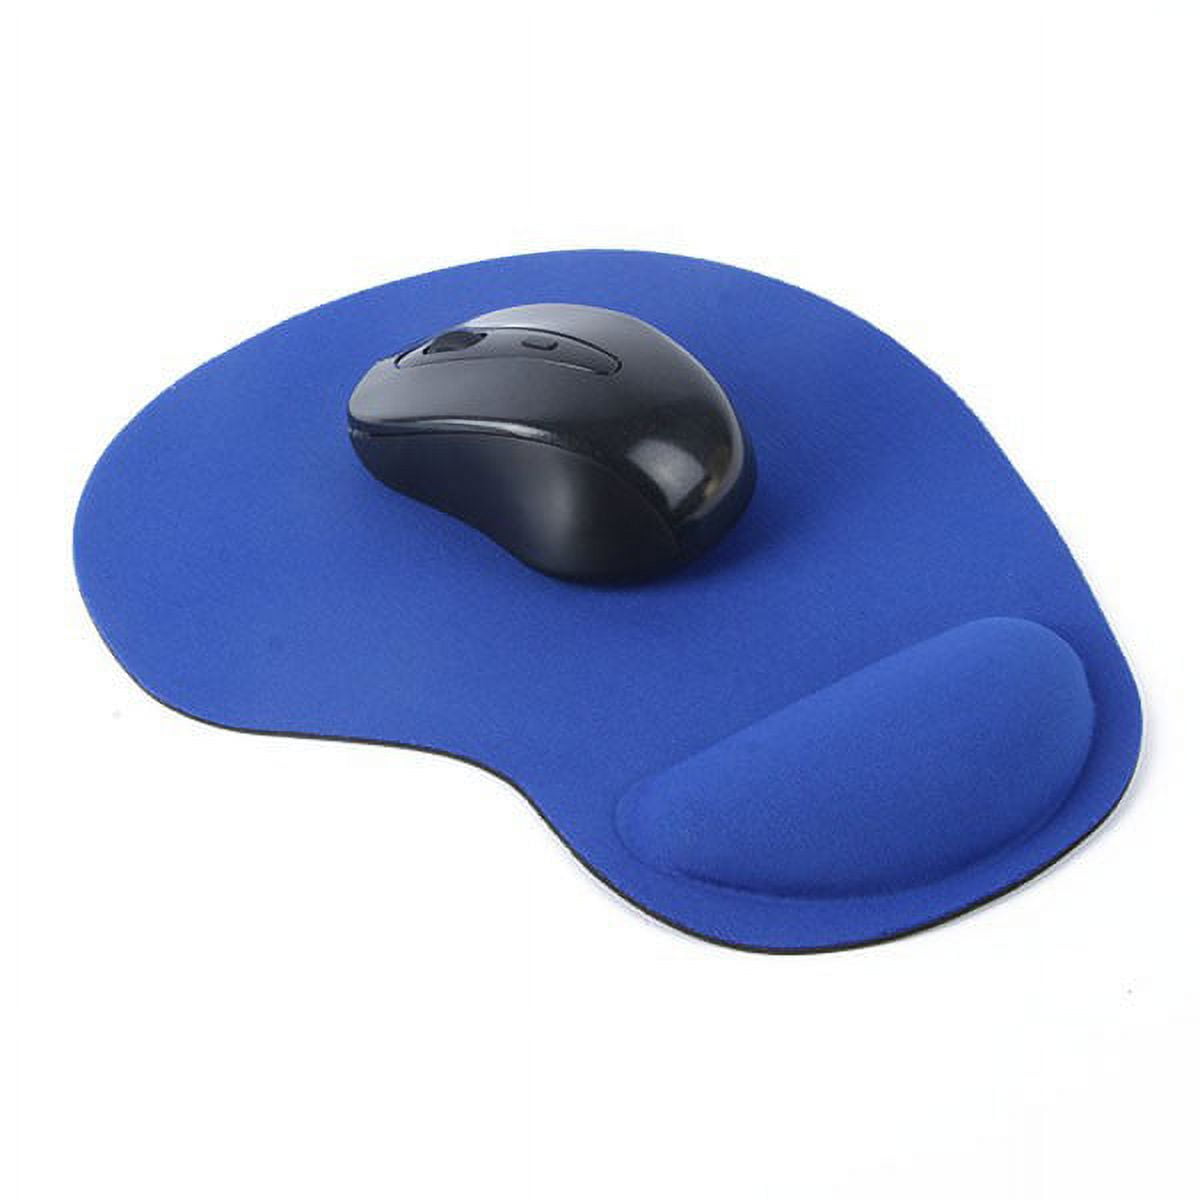 Dropship Office Mousepad With Gel Wrist Support Ergonomic Gaming Desktop Mouse  Pad Wrist Rest For Laptop Computer to Sell Online at a Lower Price